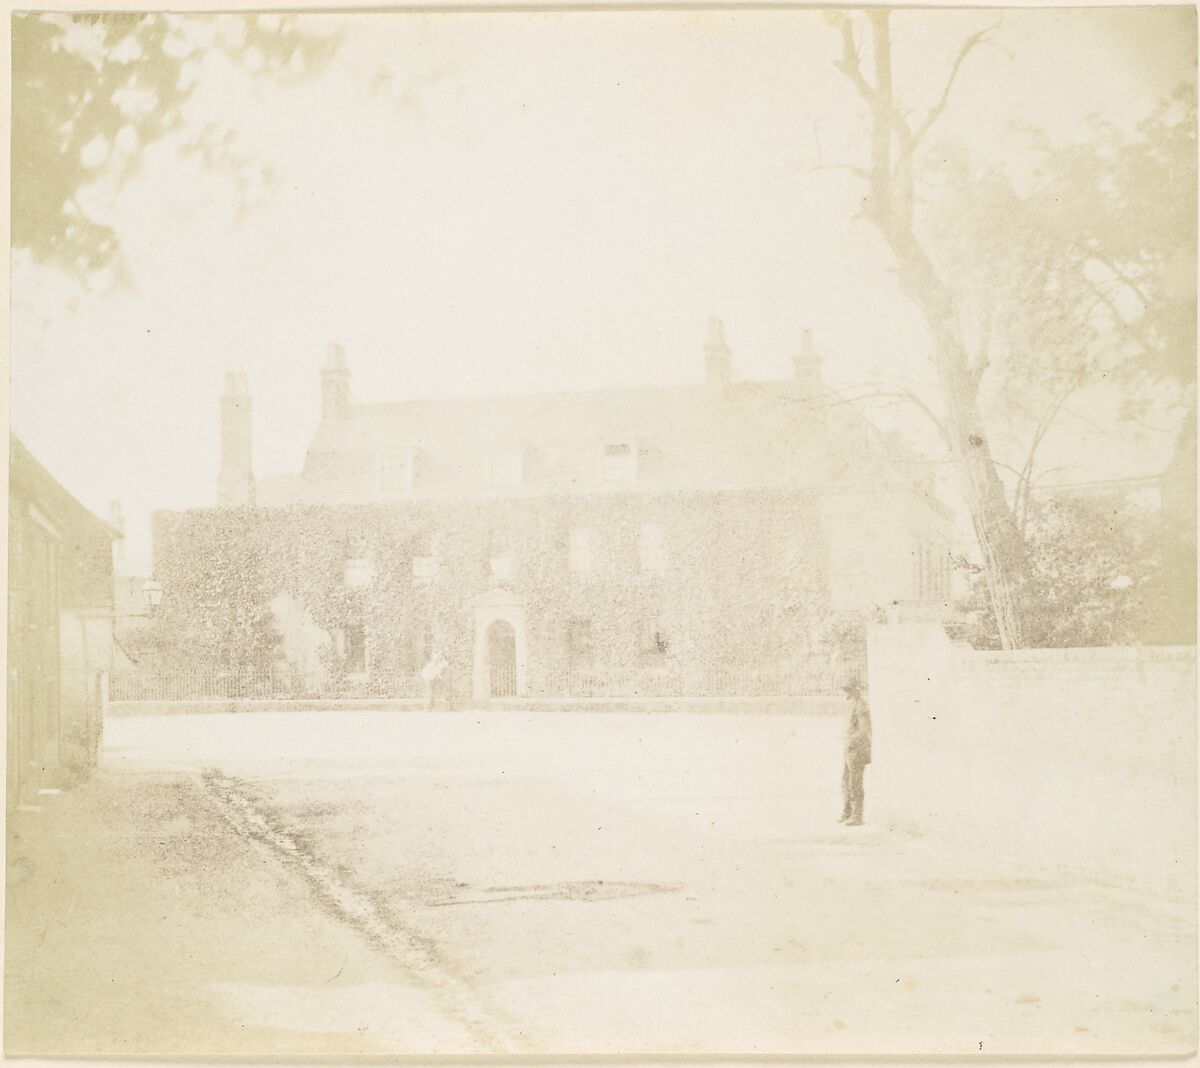 [Man in Courtyard Before House], Unknown (British), Salted paper print from paper negative 